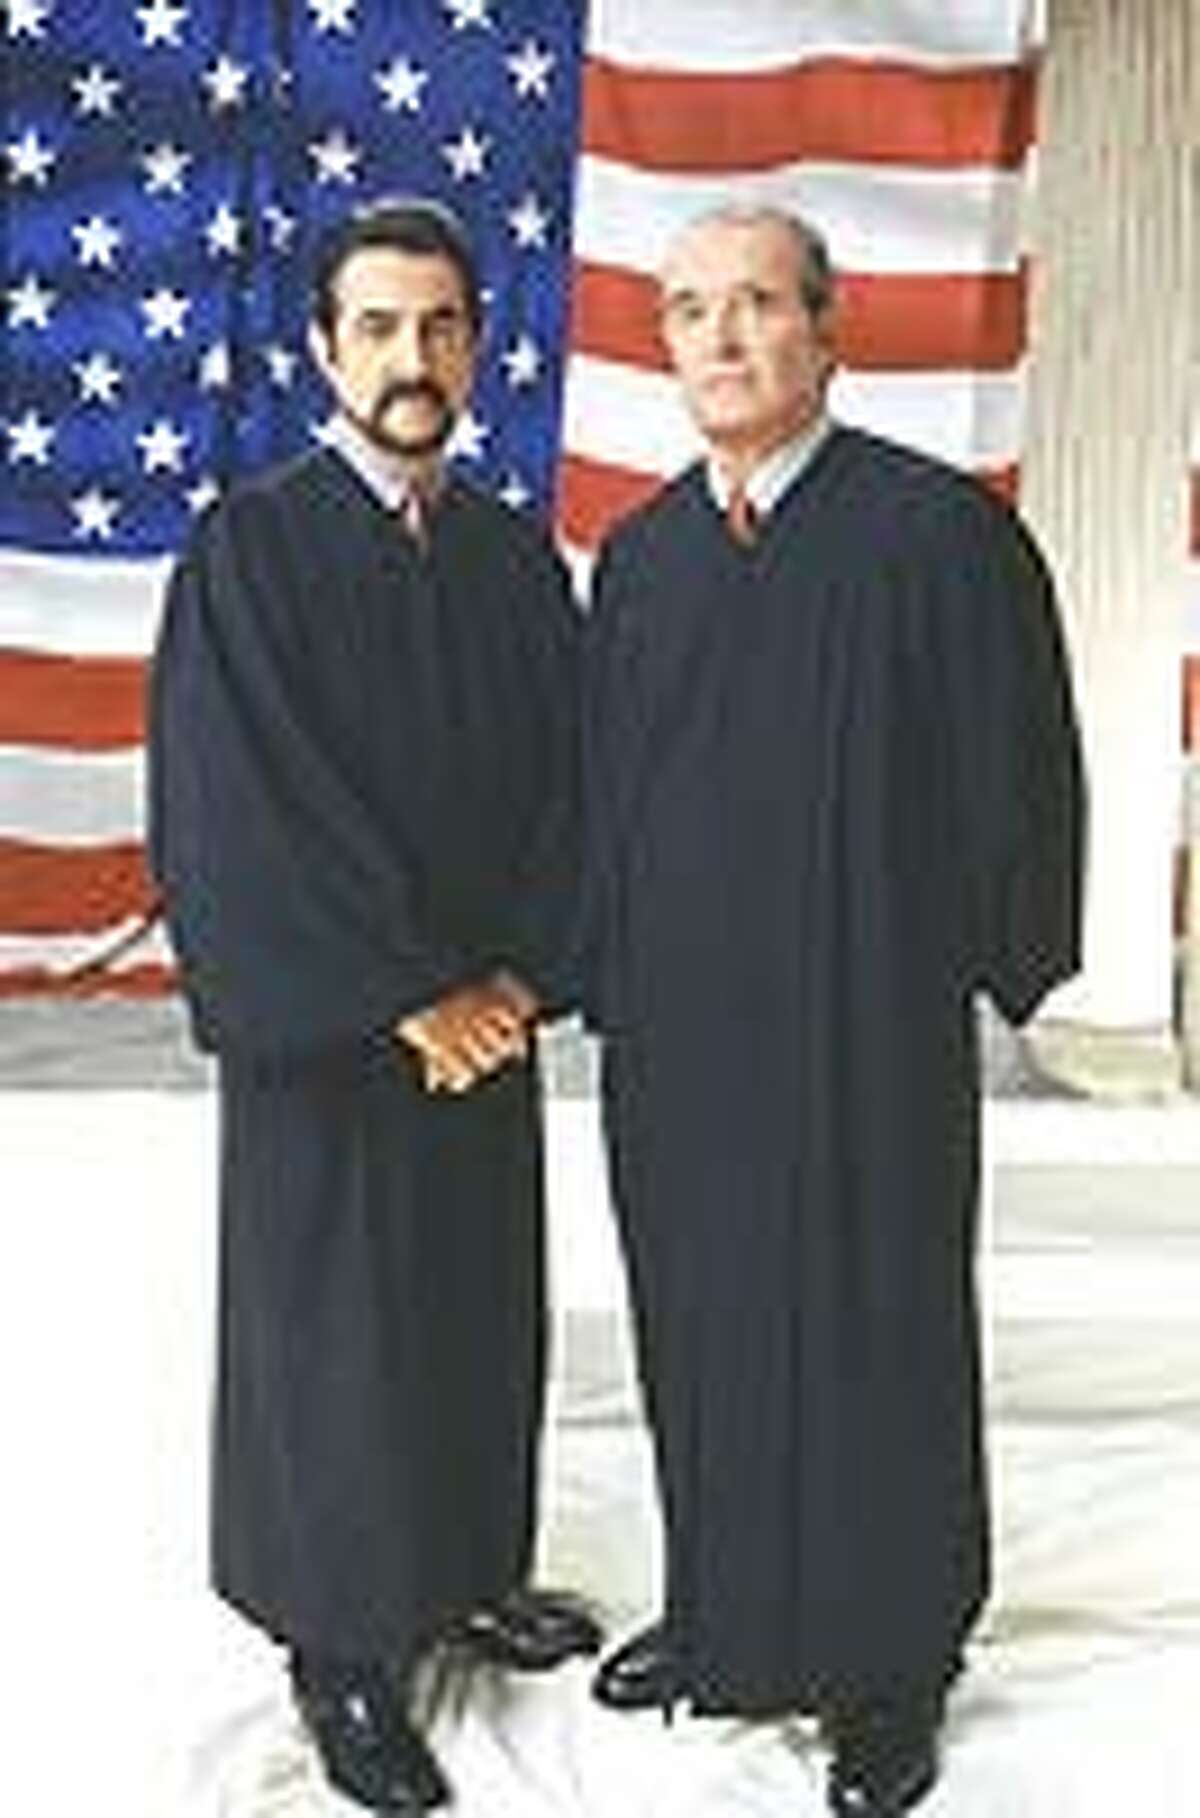 Joseph Novelli (Joe Mantegna, left), is the Supreme Court’s newest justice while James Garner plays crusty Chief Justice Thomas Brankin.